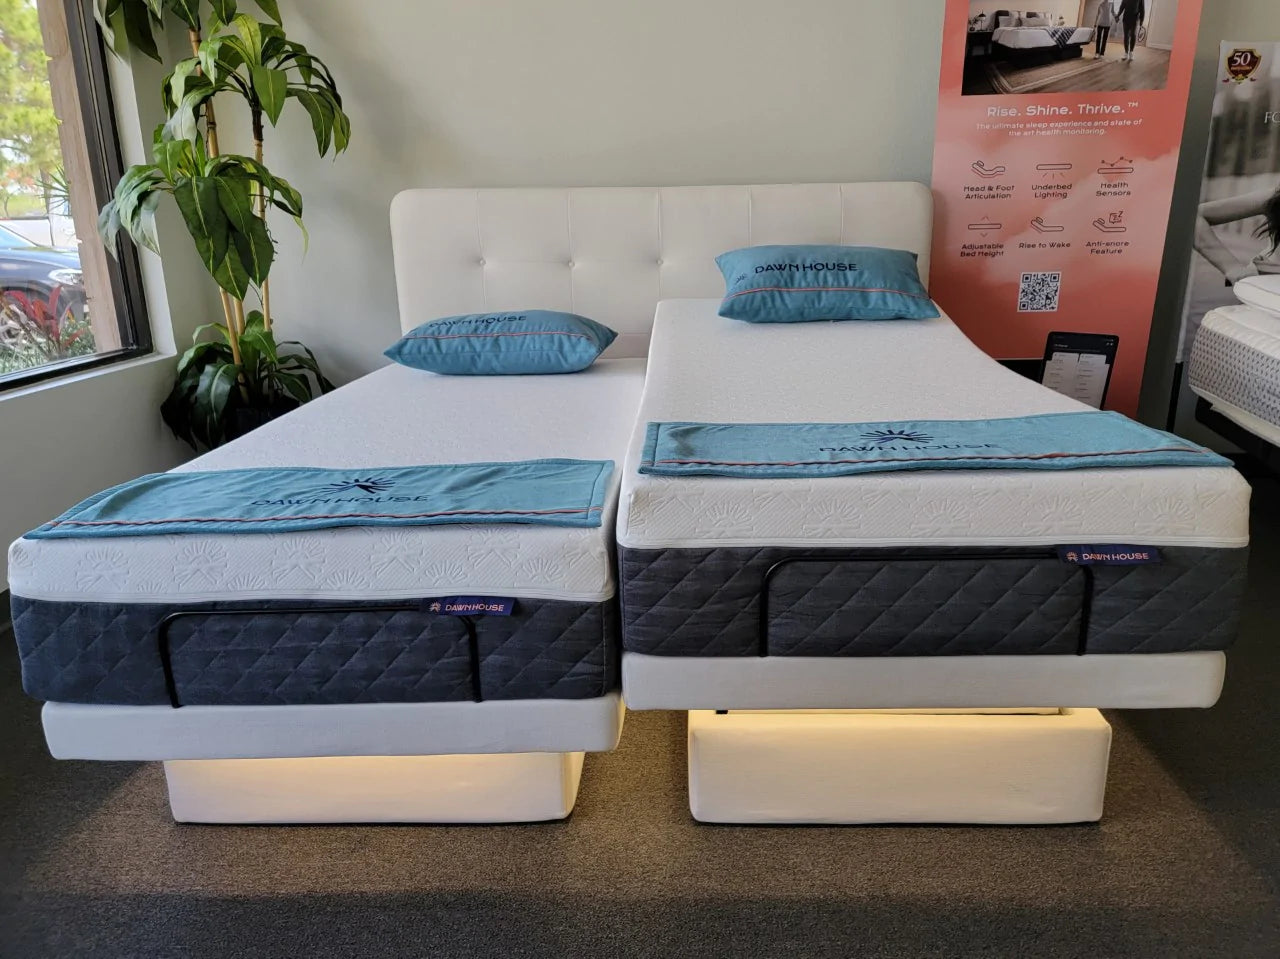 The Dawn House Living Adjustable Smart Bed offers built-in health sensors, voice controls, adjustable bed height, and more. 